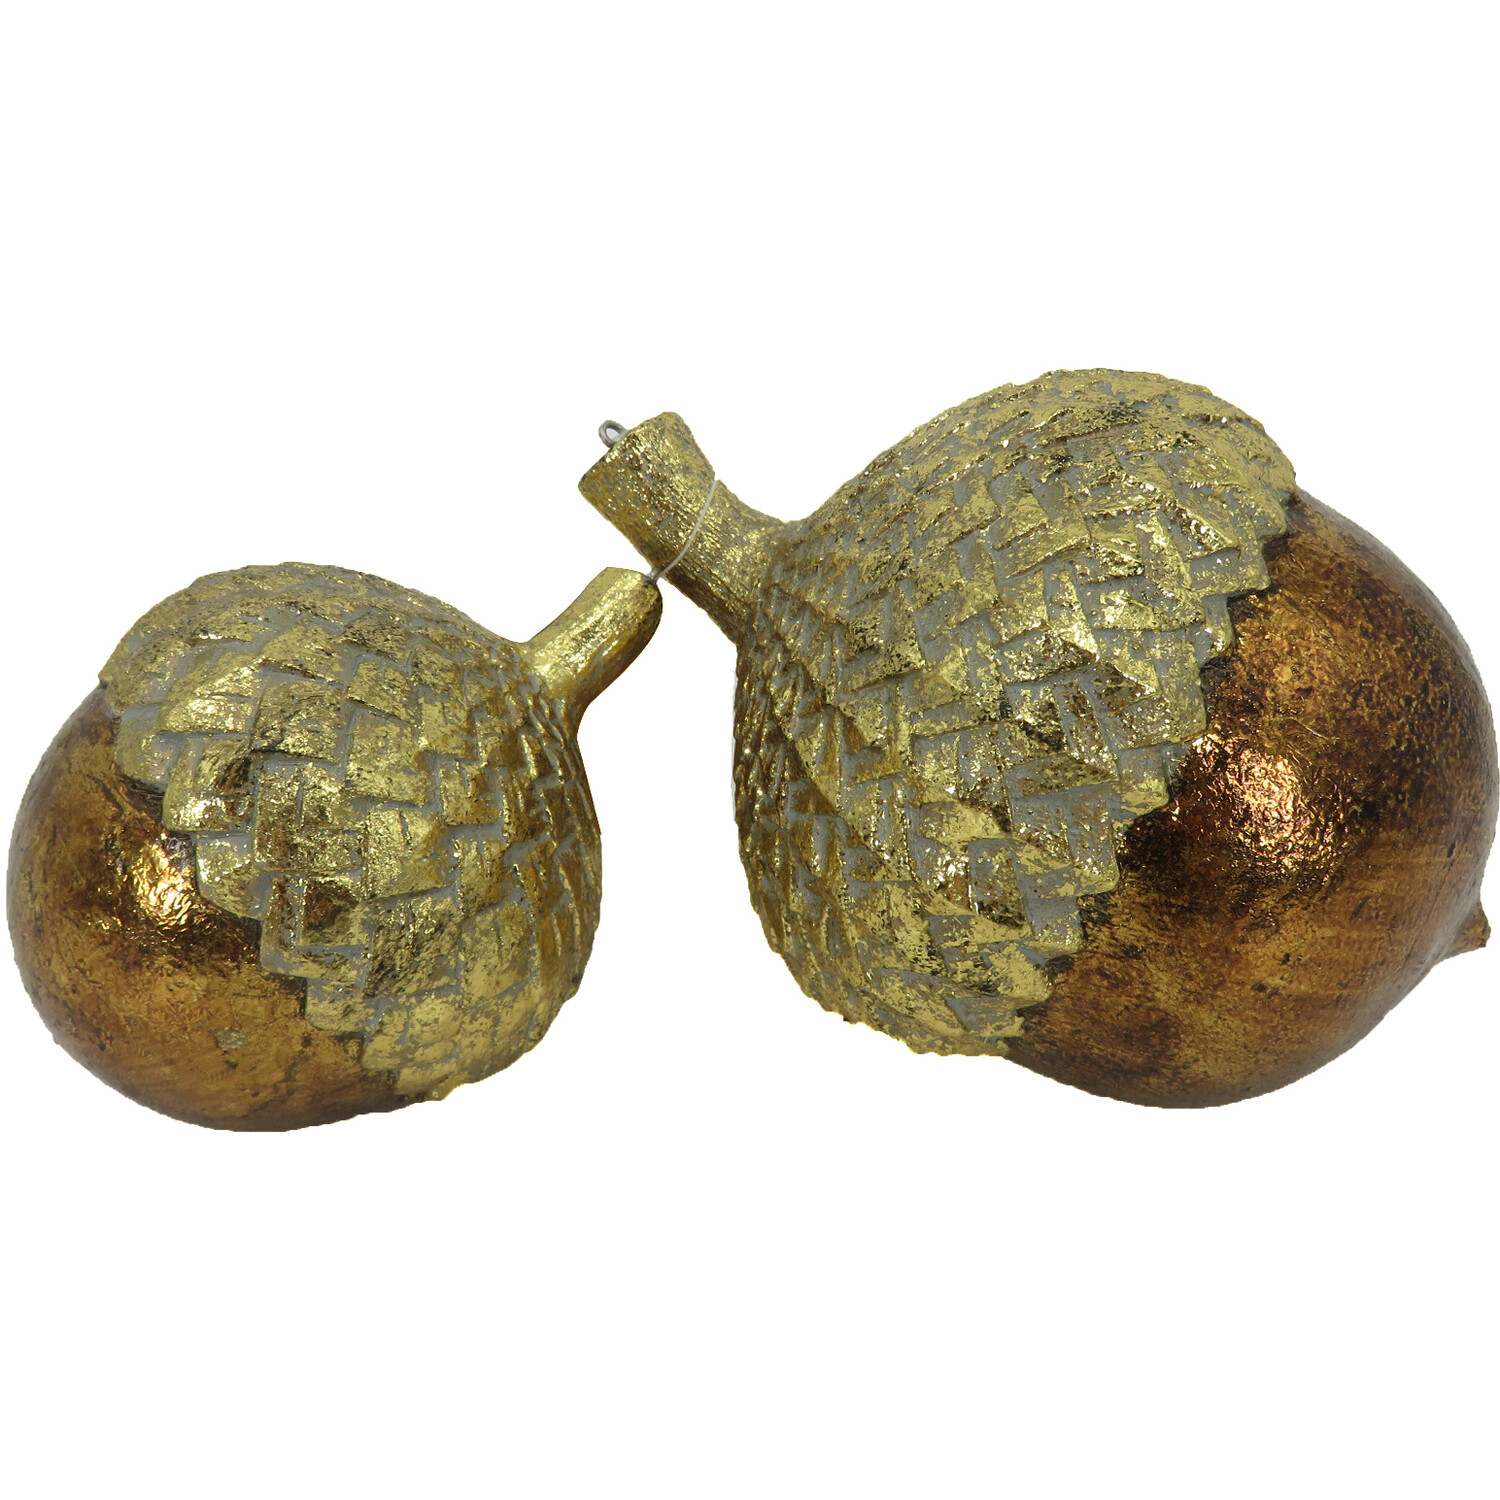 Grace and Glory Golden Acorns 2 Pack Image